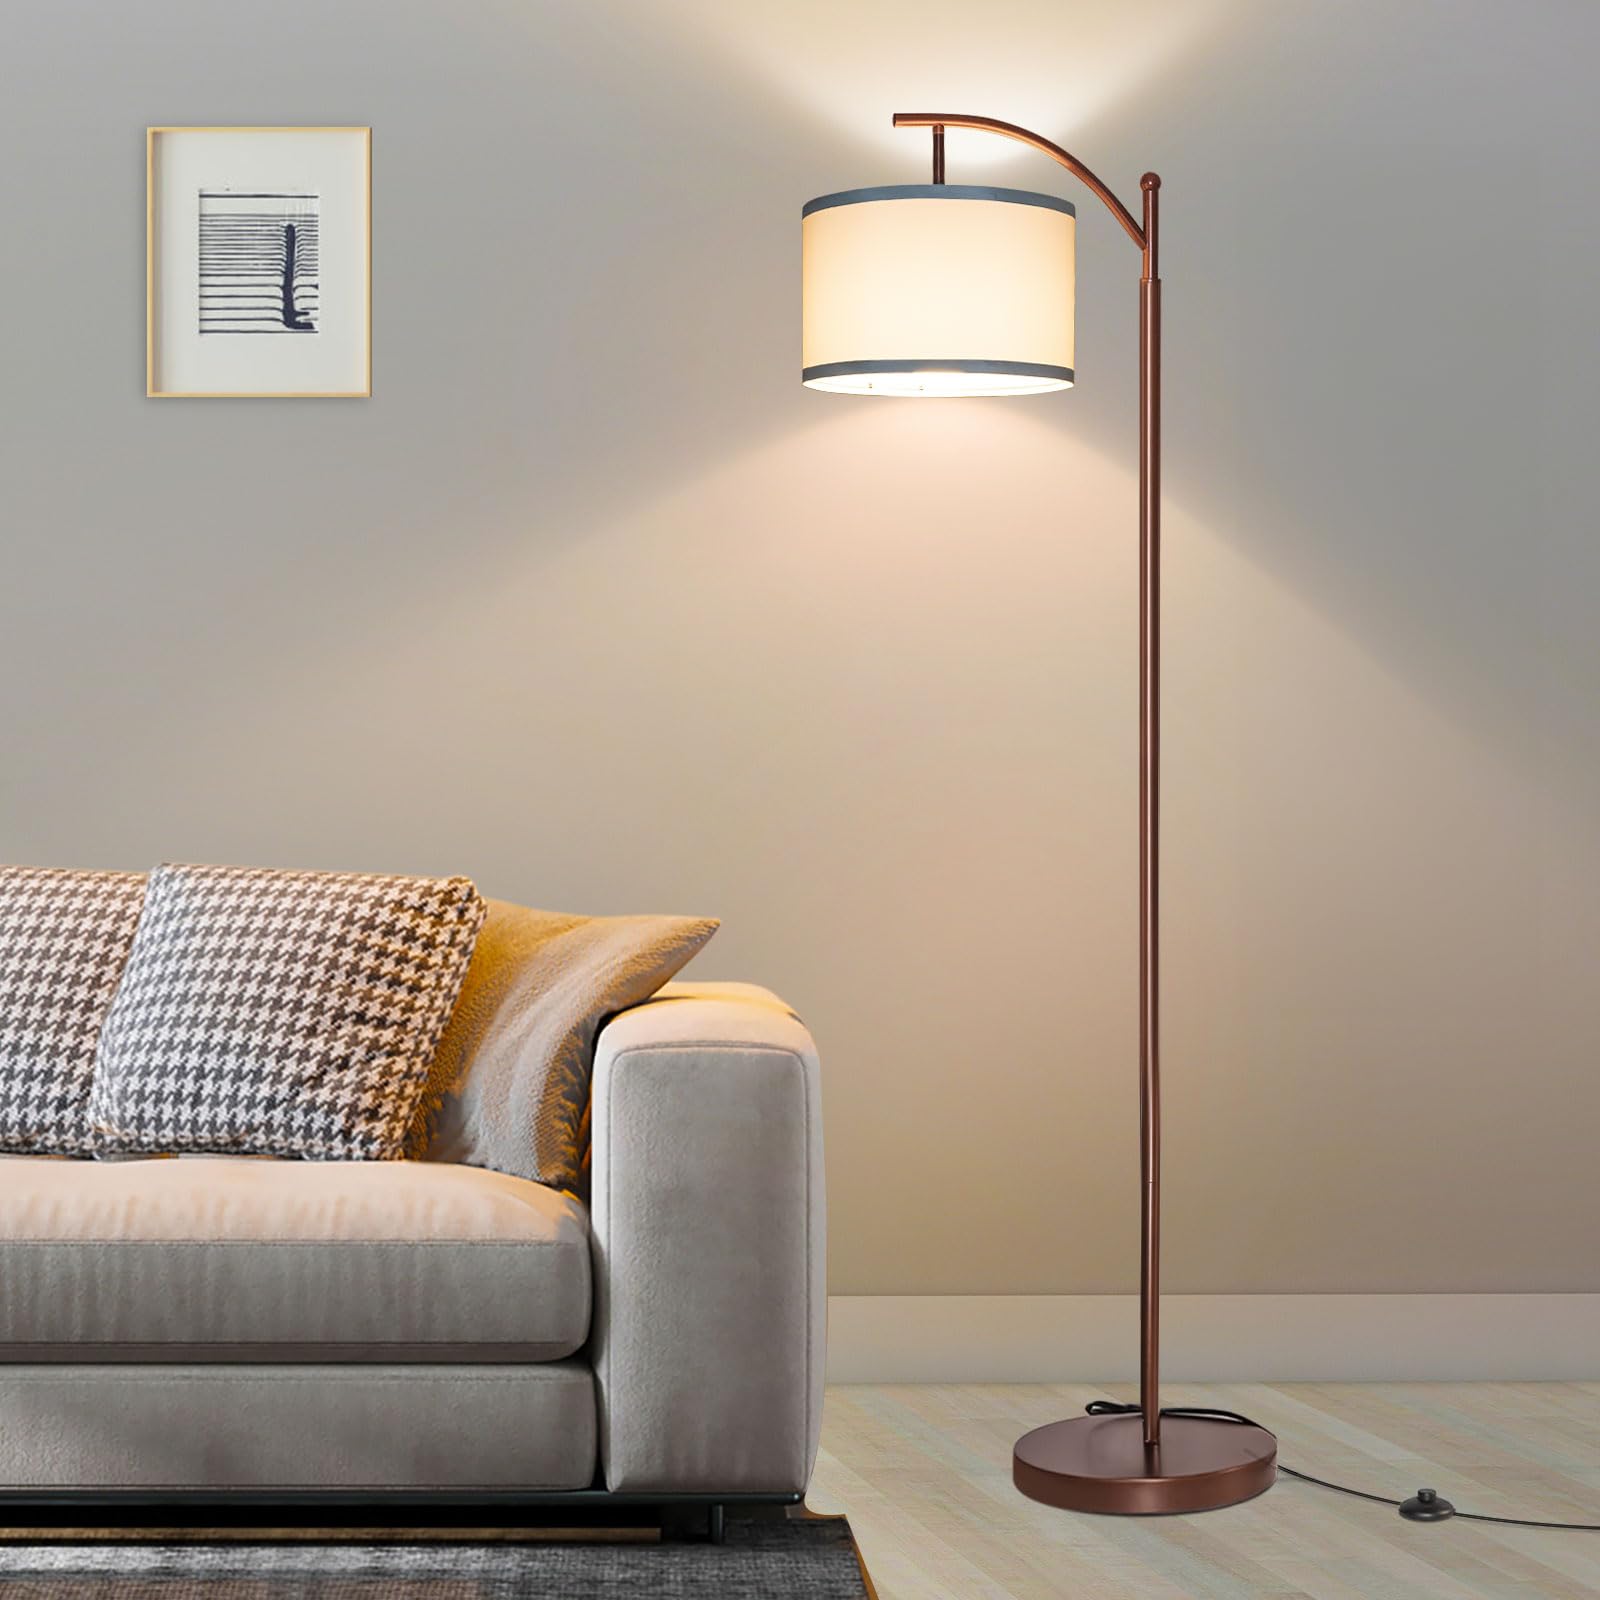 What Is The Best Floor Lamp For Reading